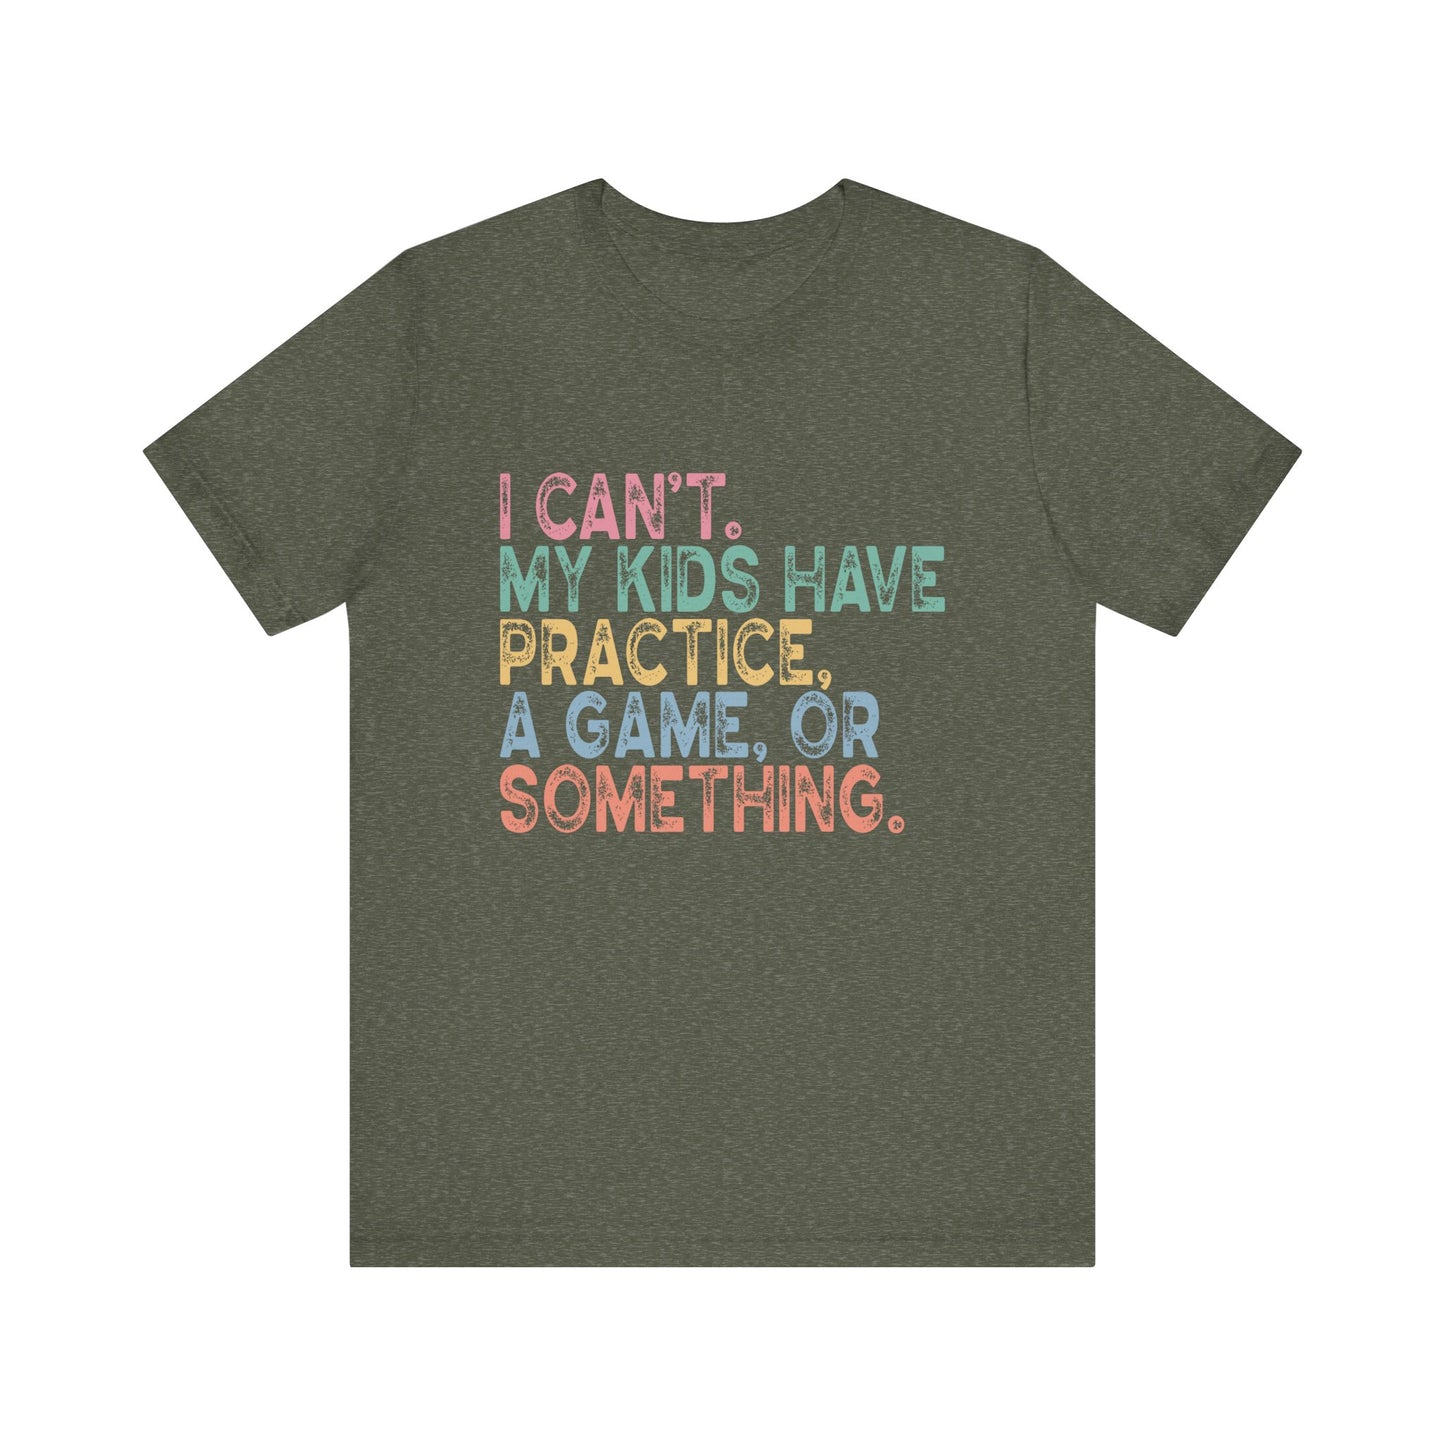 Can't my kids have practice a game or something women's funny Short Sleeve Shirt for mom